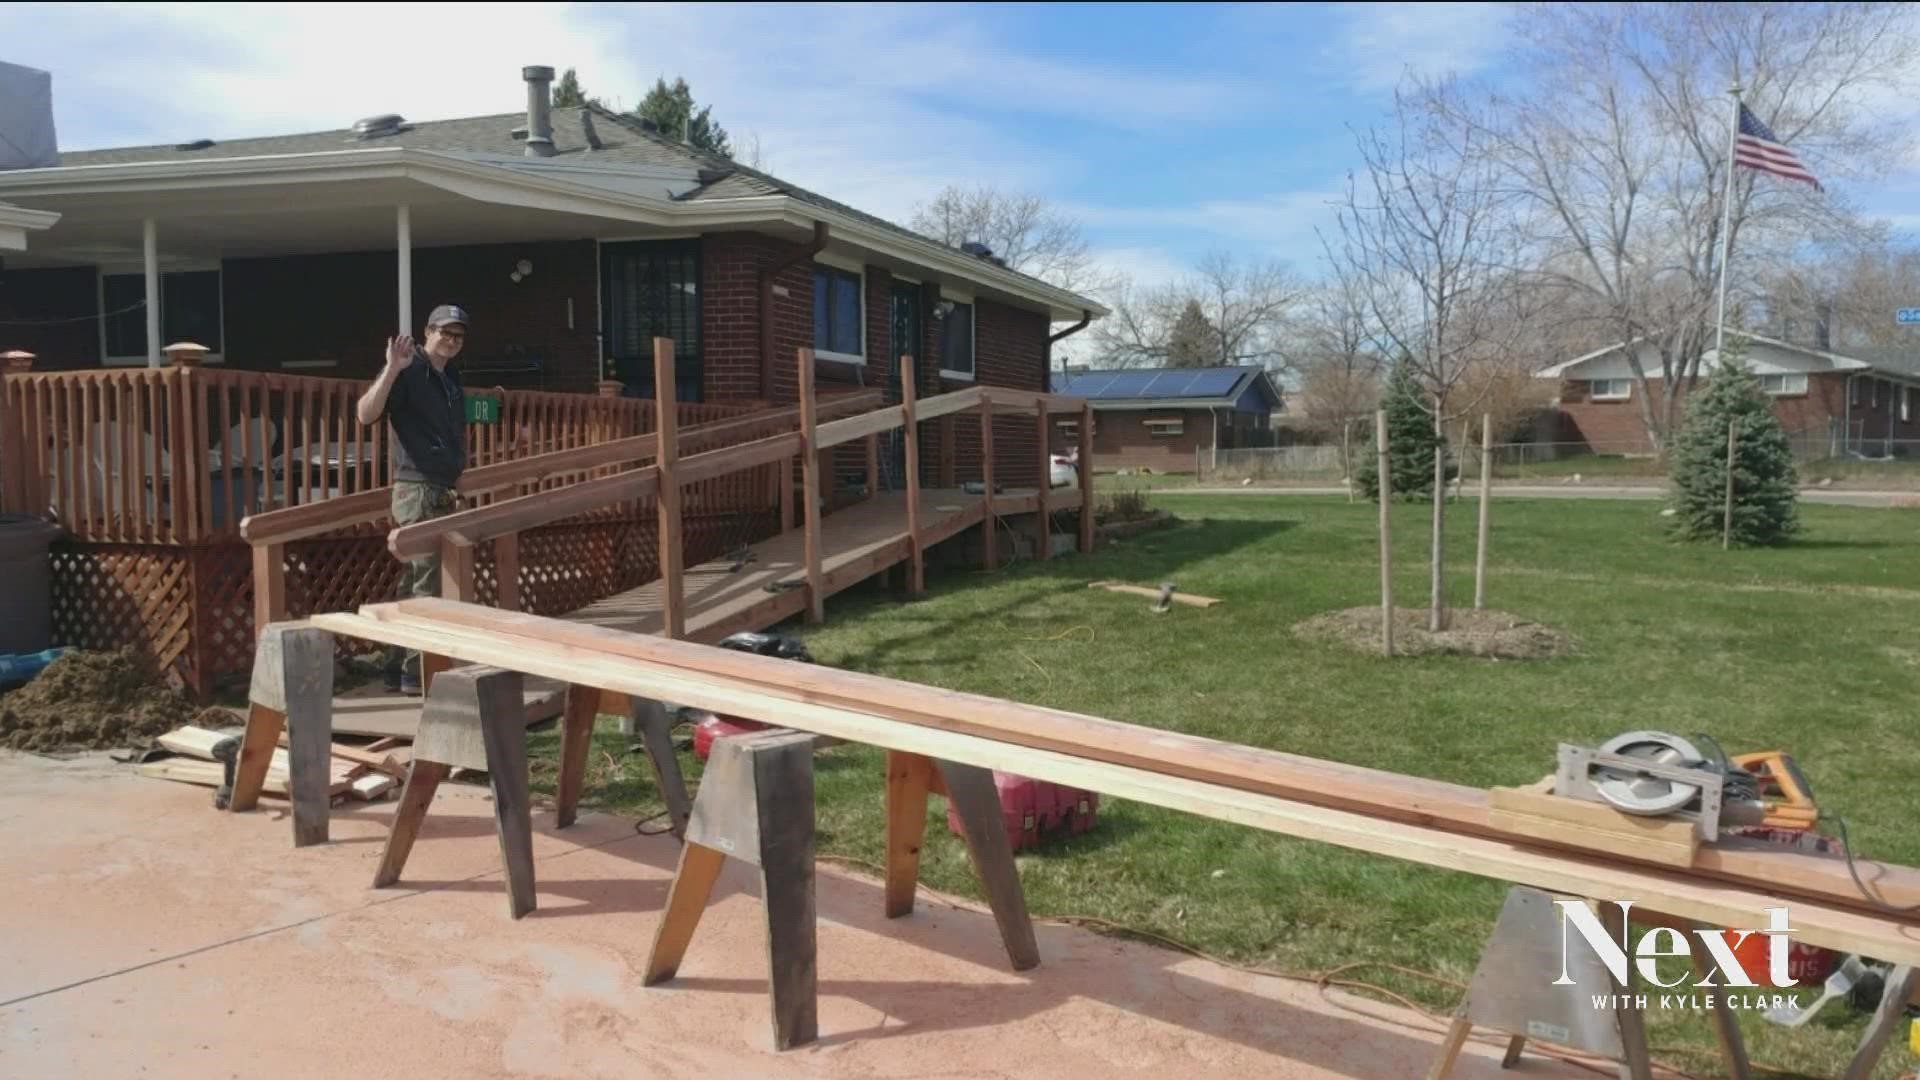 The home modification and repair program operated by the Brothers Redevelopment non-profit allows older Coloradans to stay in the homes they love.